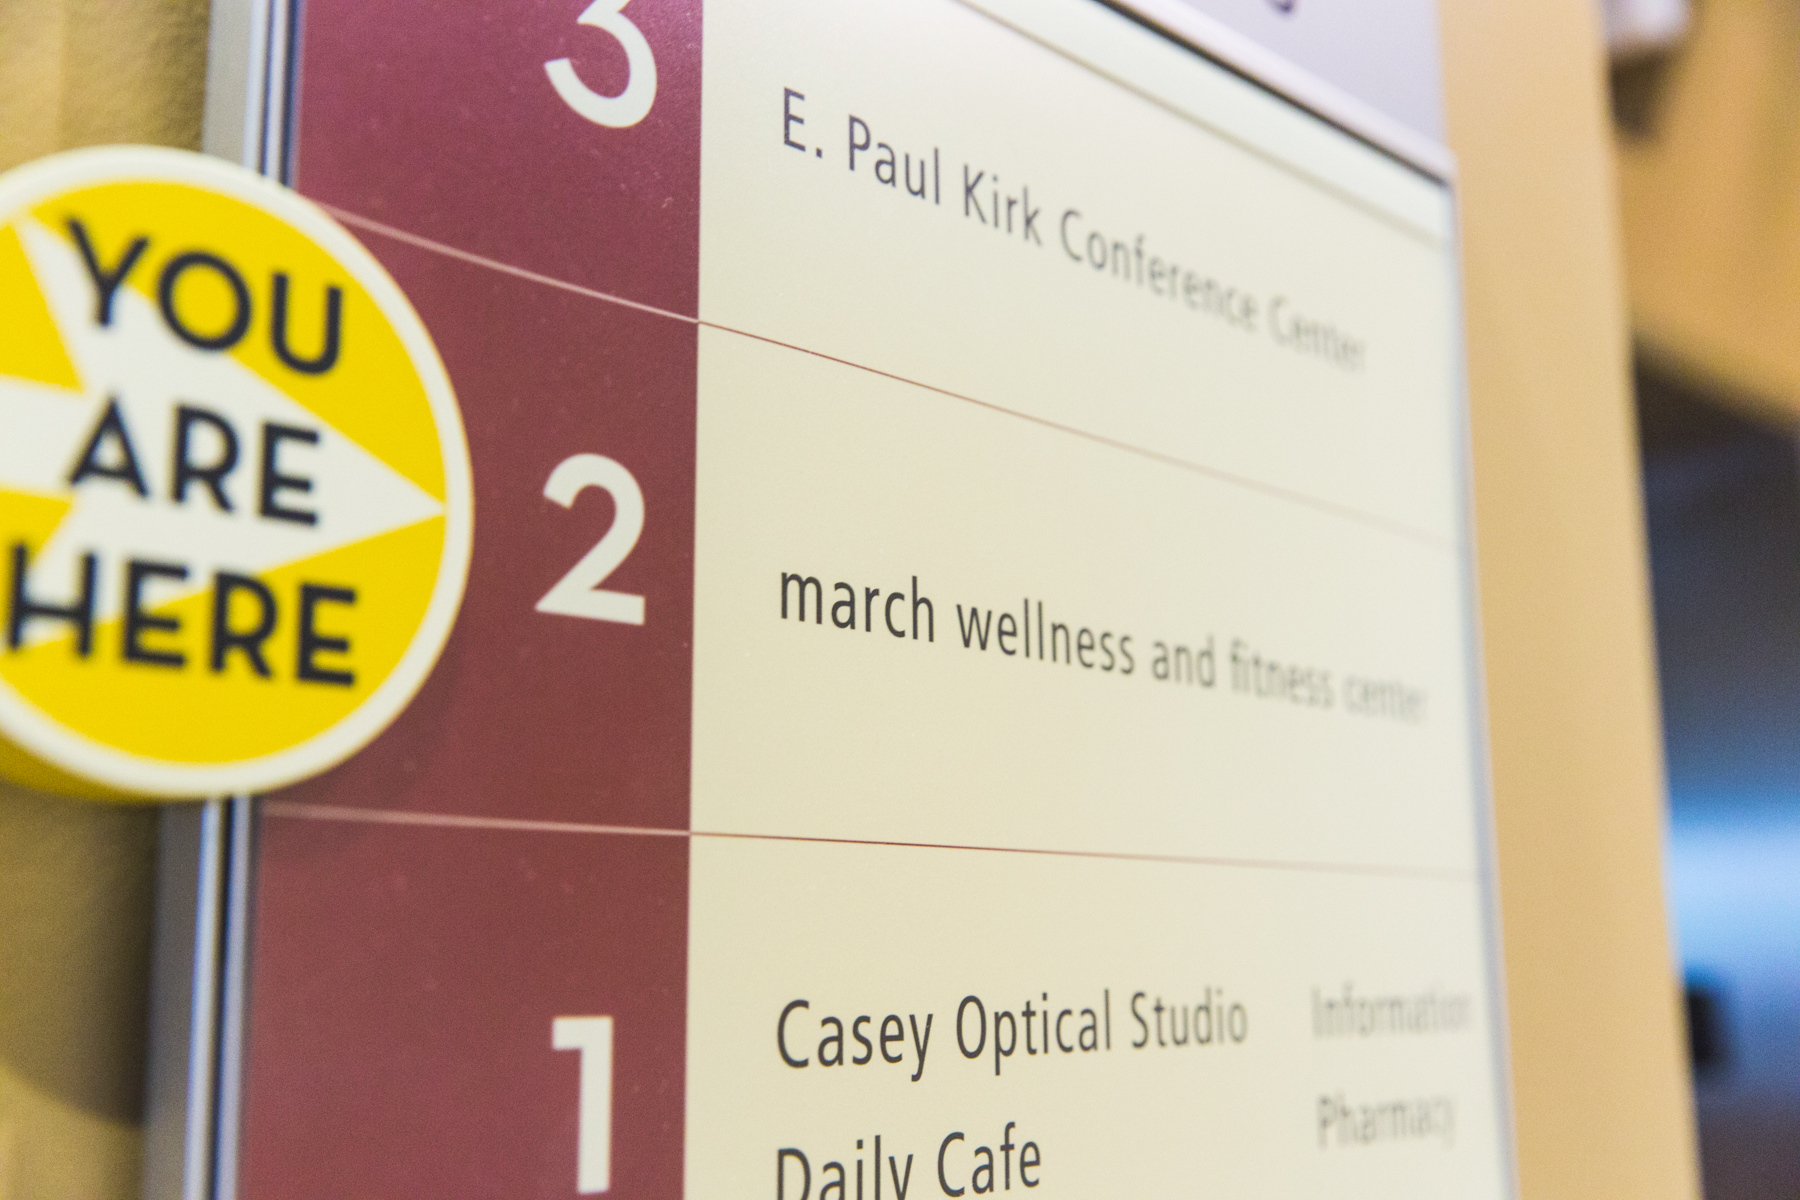 march wellness & fitness center's "you are here" sign in from of march wellness facilities